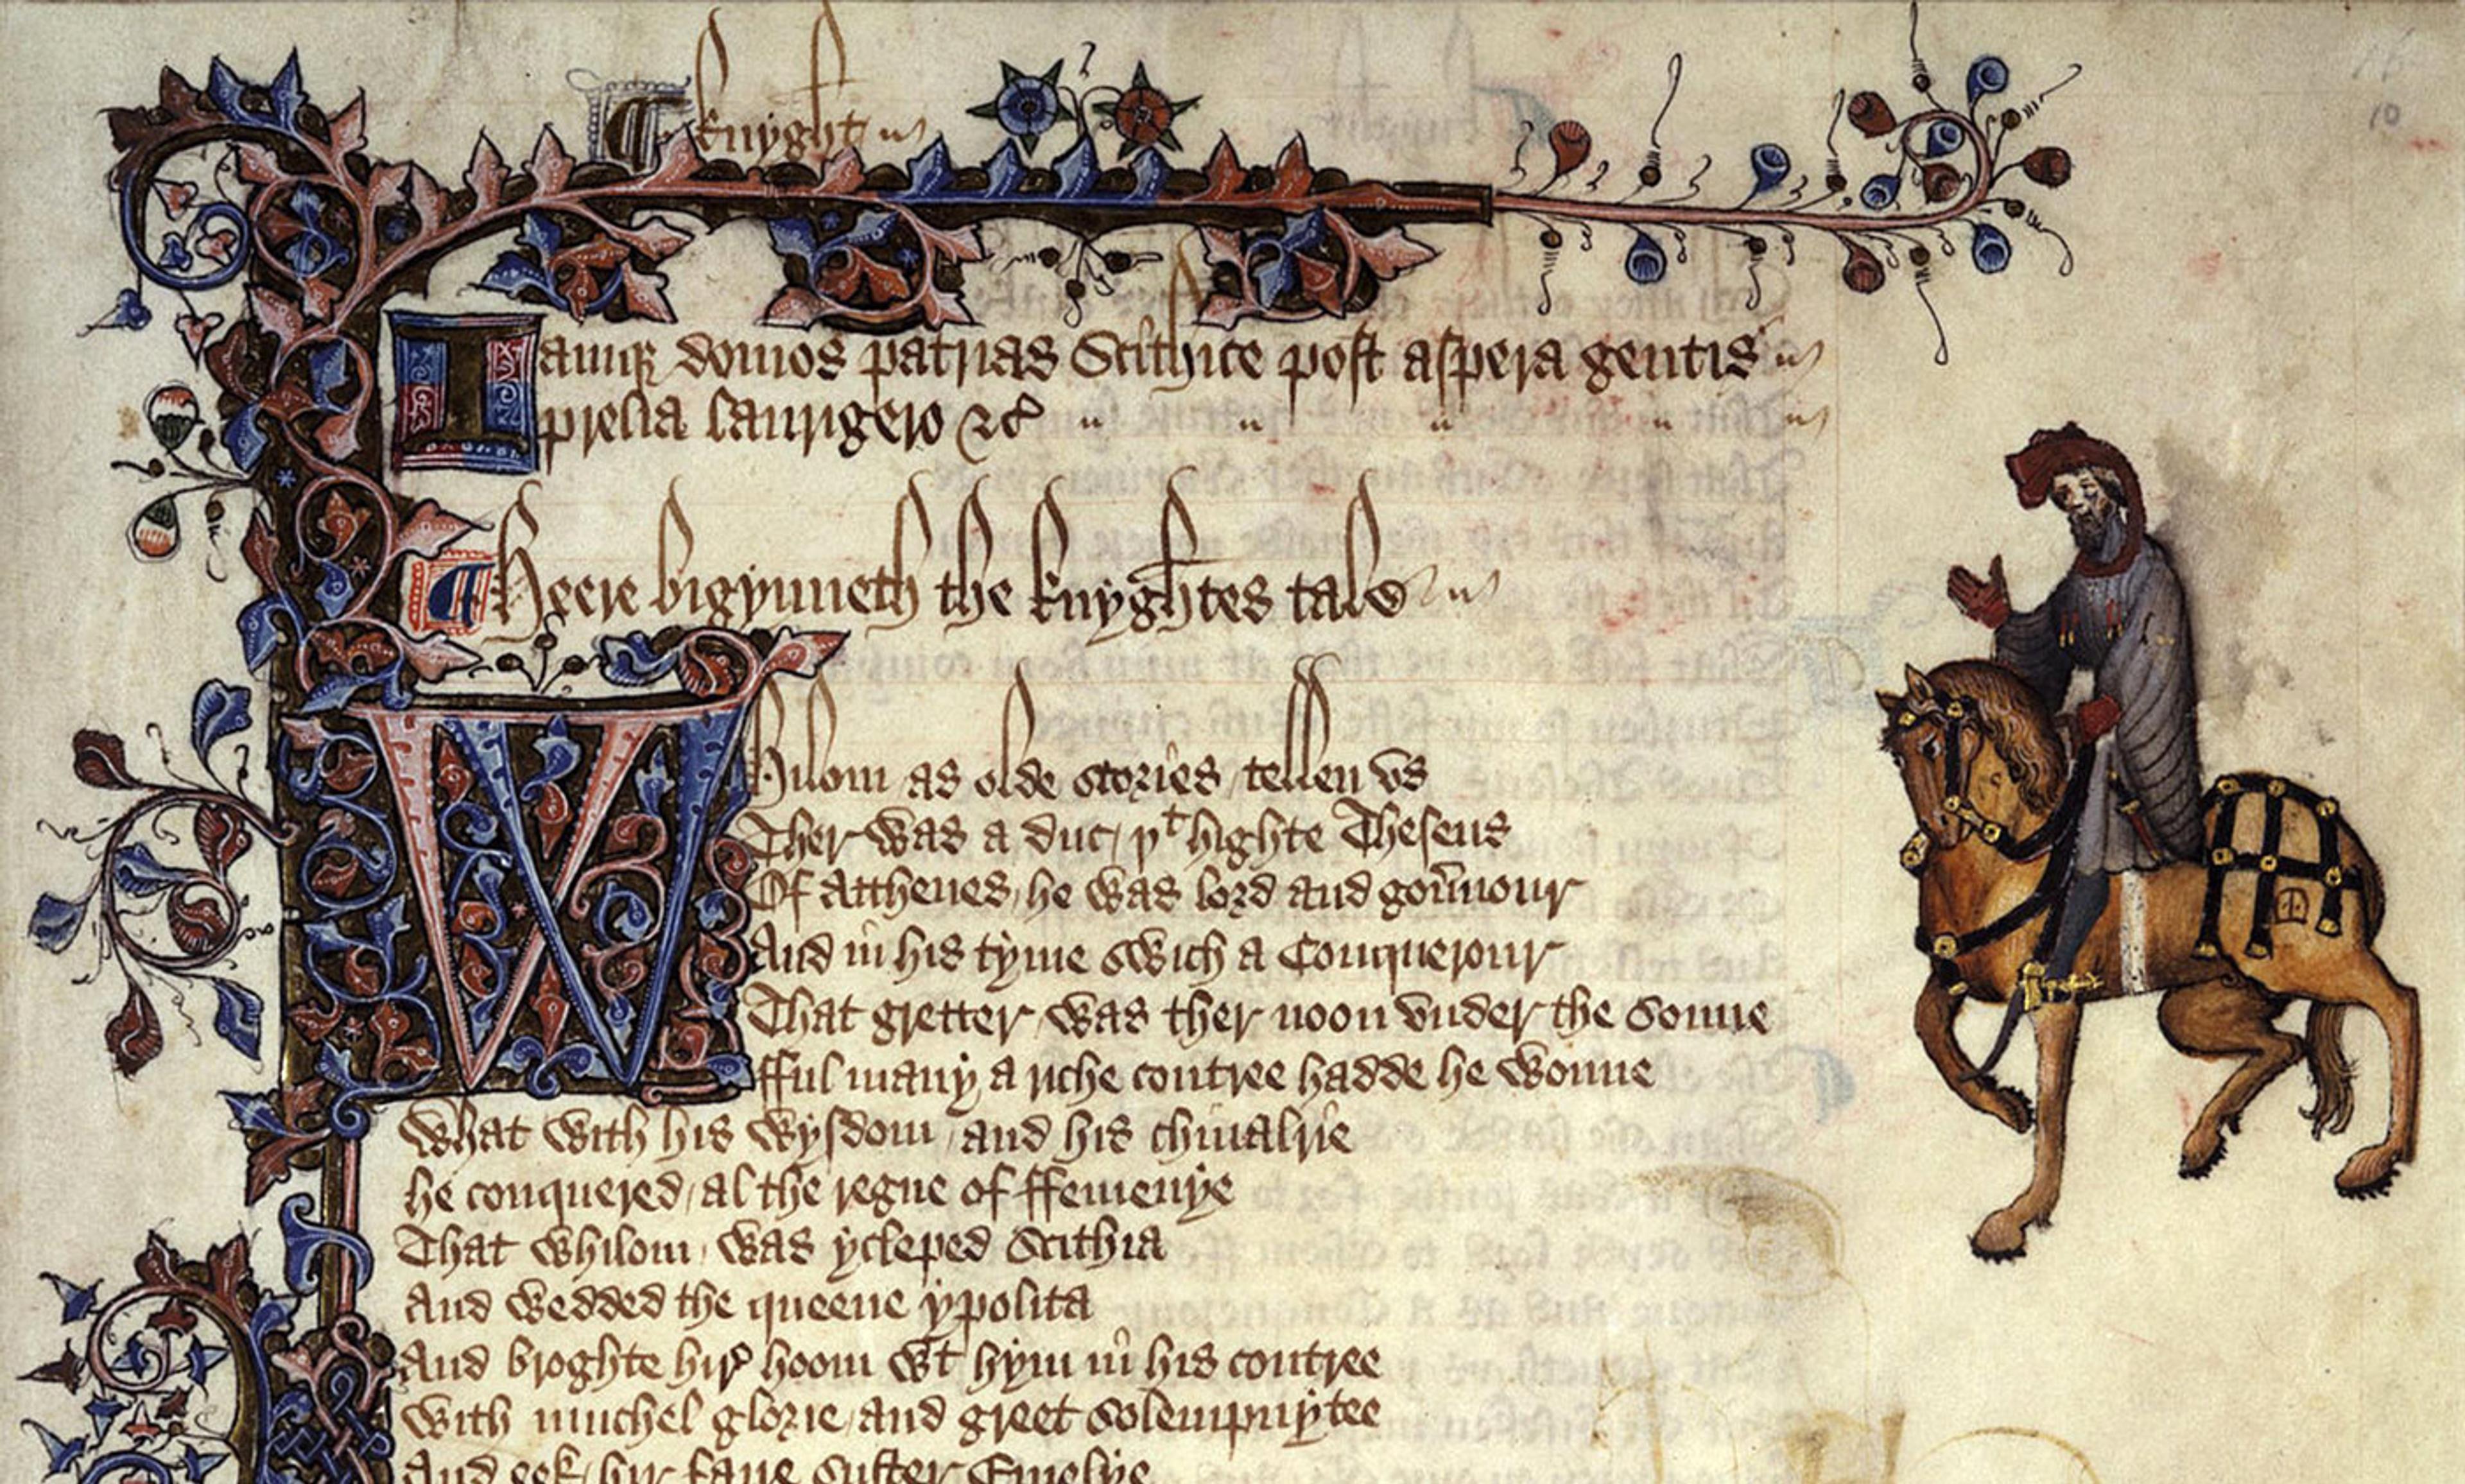 <p>The Knight from the Ellesmere Manuscript of the Canterbury Tales. <em>Courtesy Wikipedia</em></p>